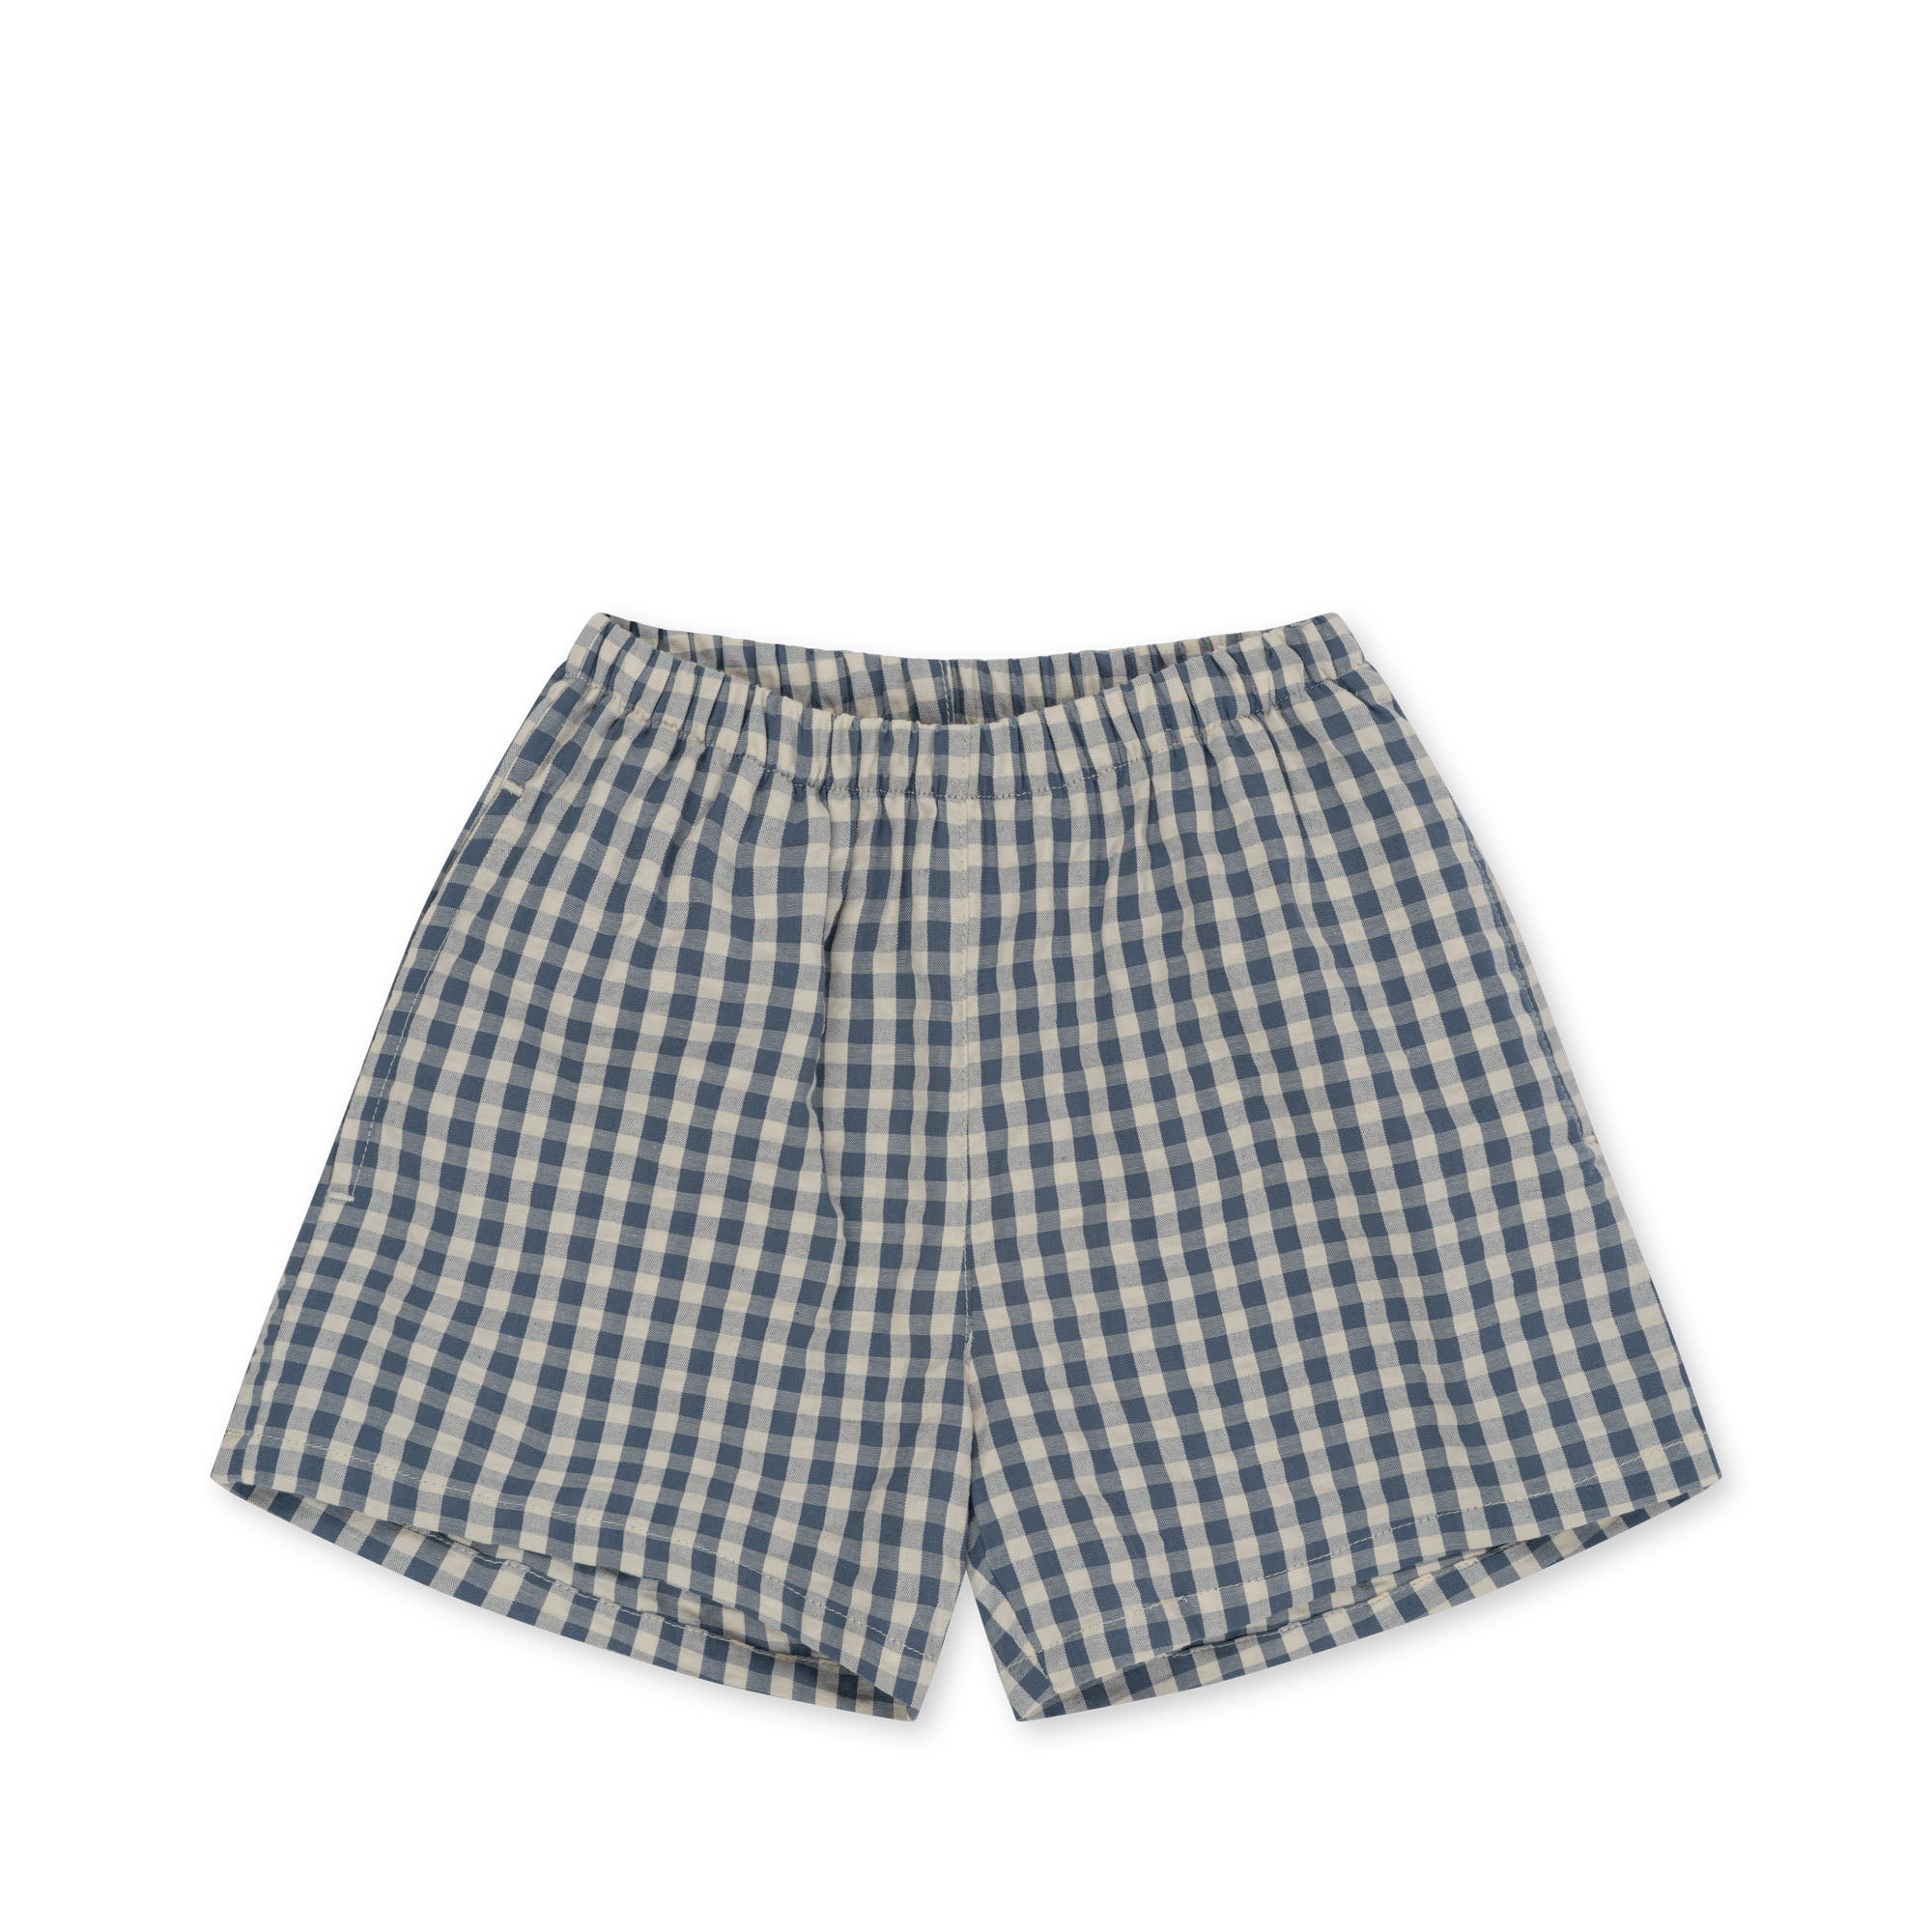 Konges Sløjd A/S Woven Shorts & Bloomers captains blue check